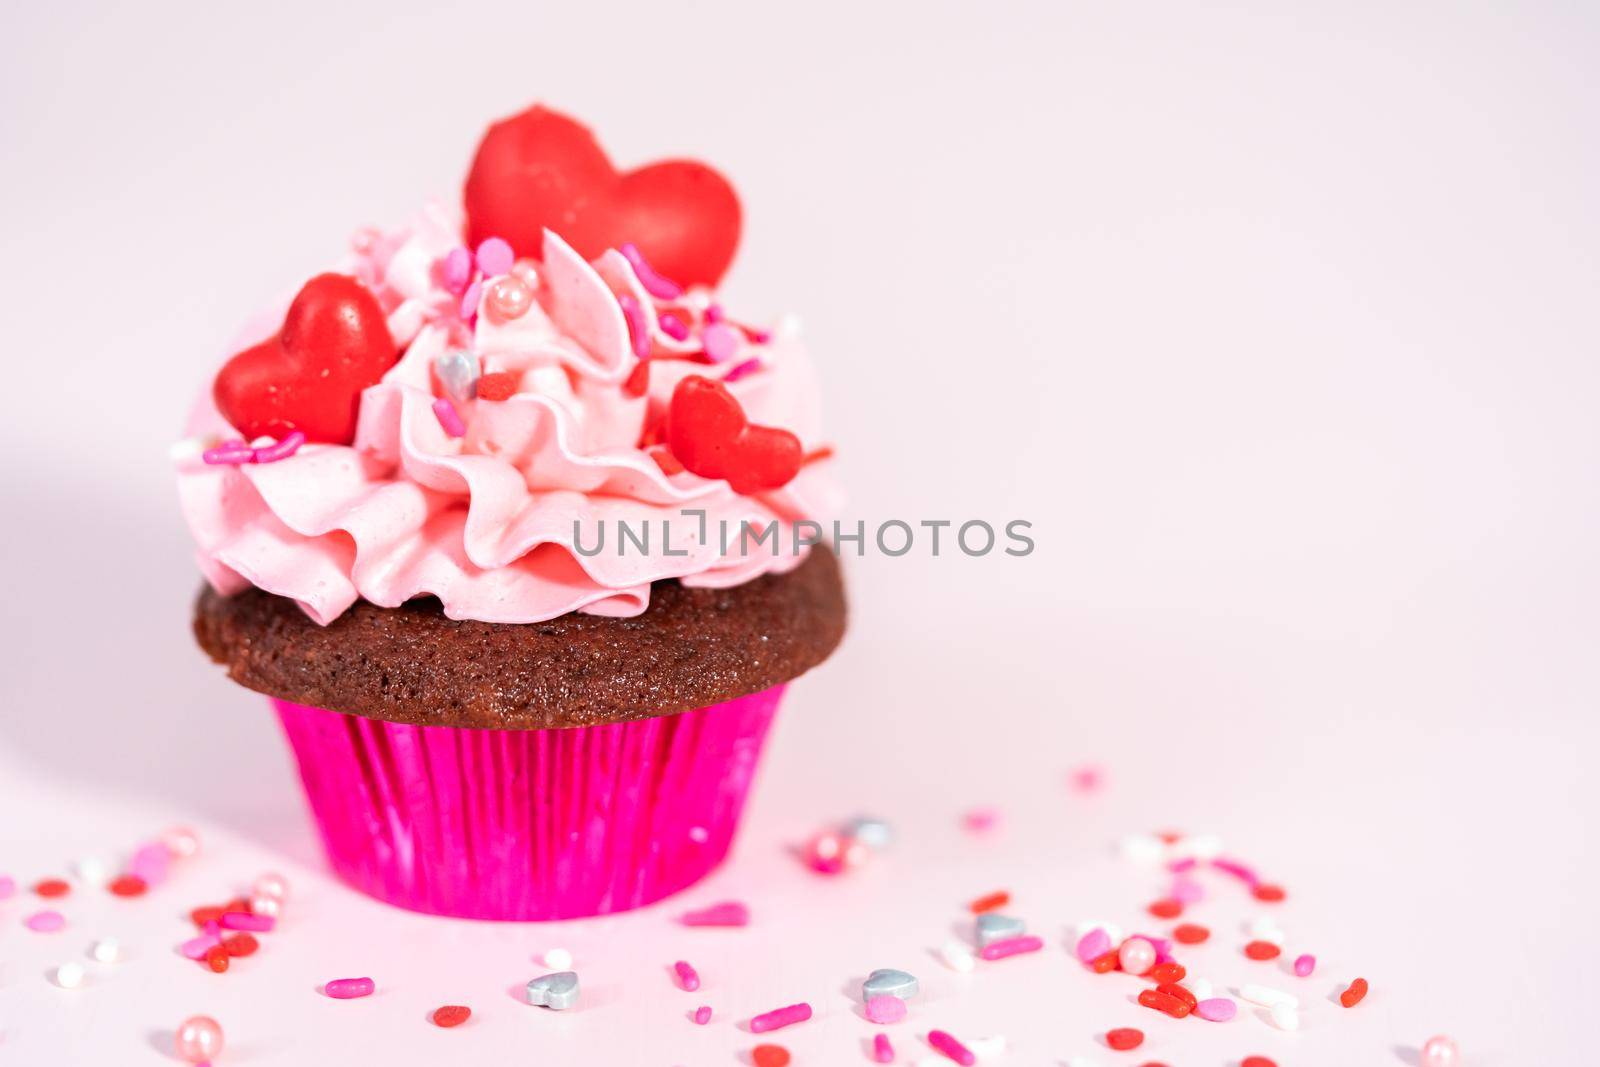 Red velvet cupcakes with pink Italian buttercream frosting and decorates with heart and kiss shaped red chocolates.